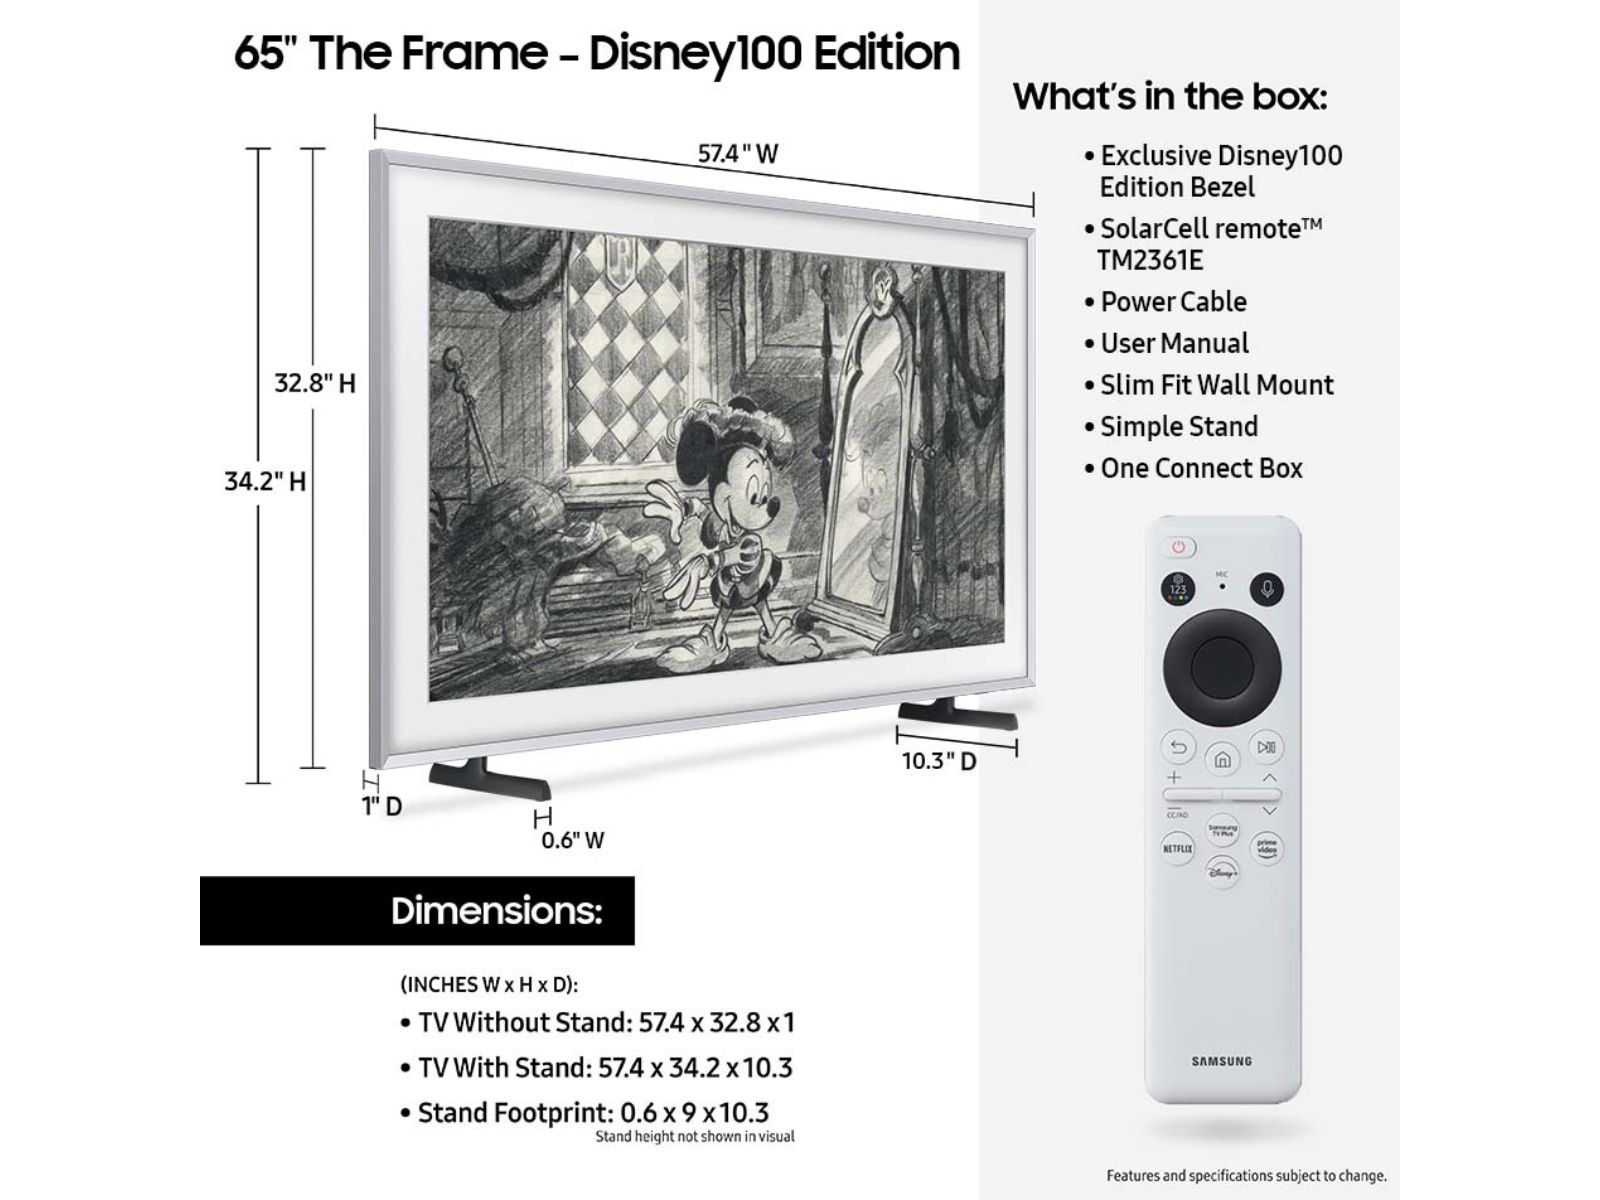 Samsung releases Frame Disney 100th anniversary edition - KED Global